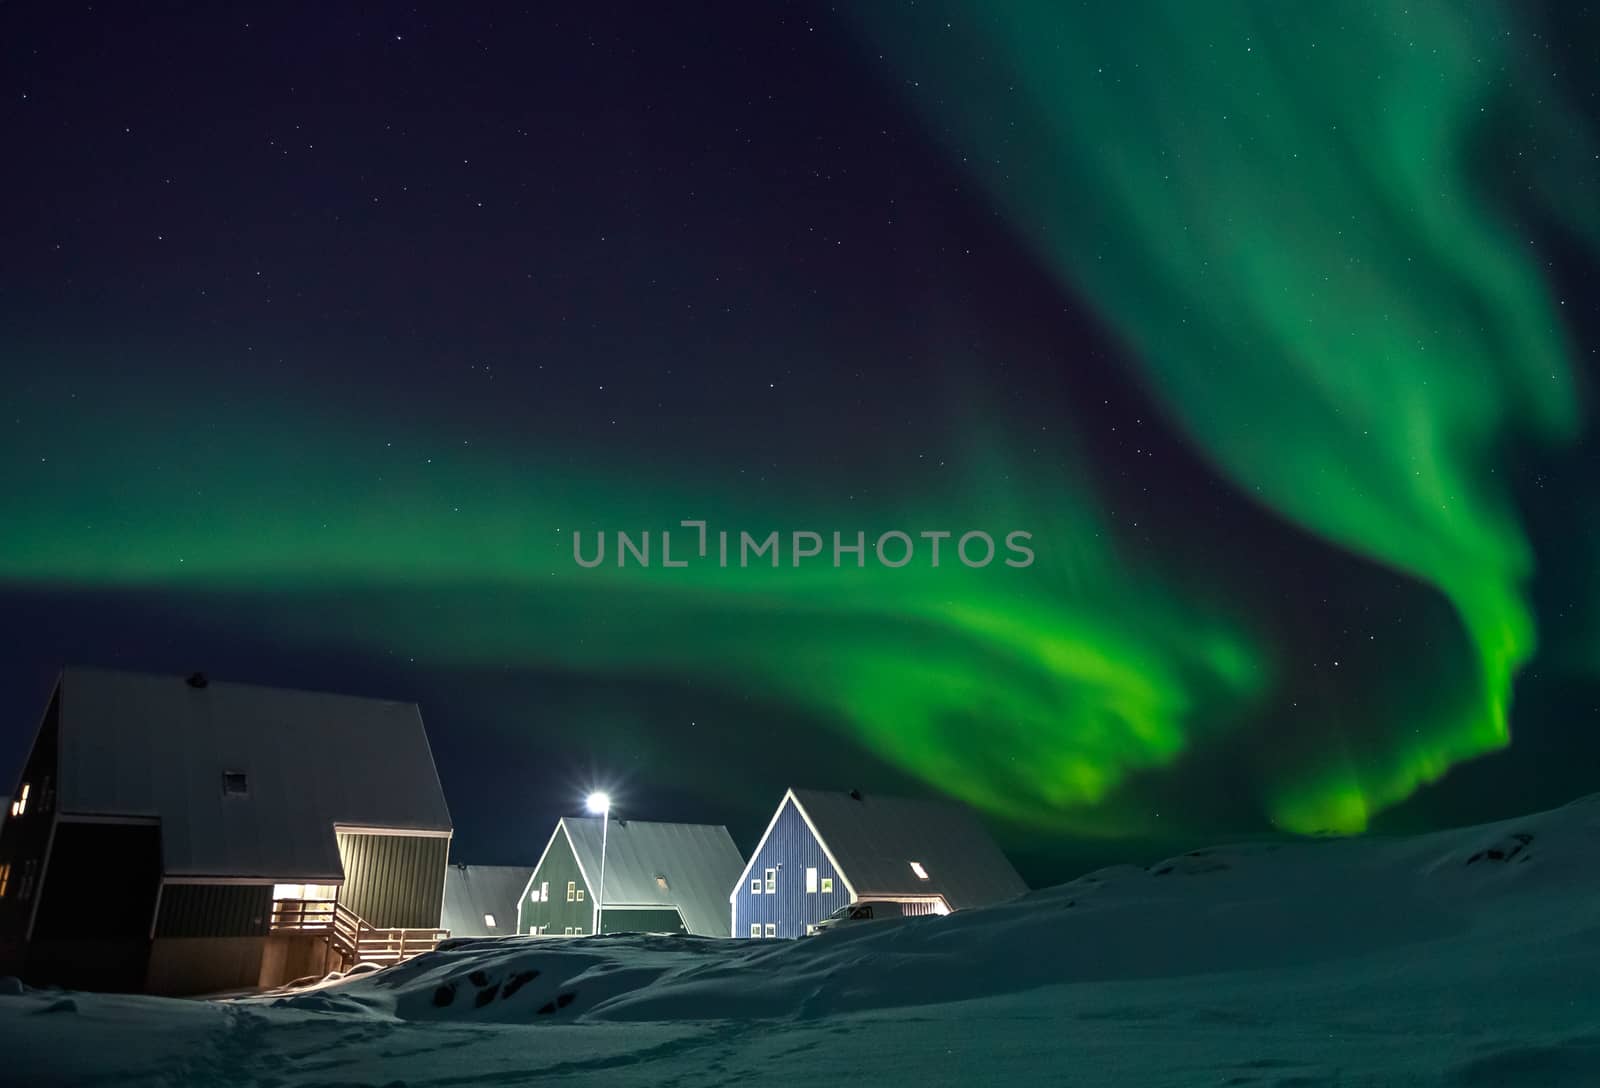 Arctic village and green waves of Northern lights over Inuit houses, in a suburb of Nuuk, Greenland